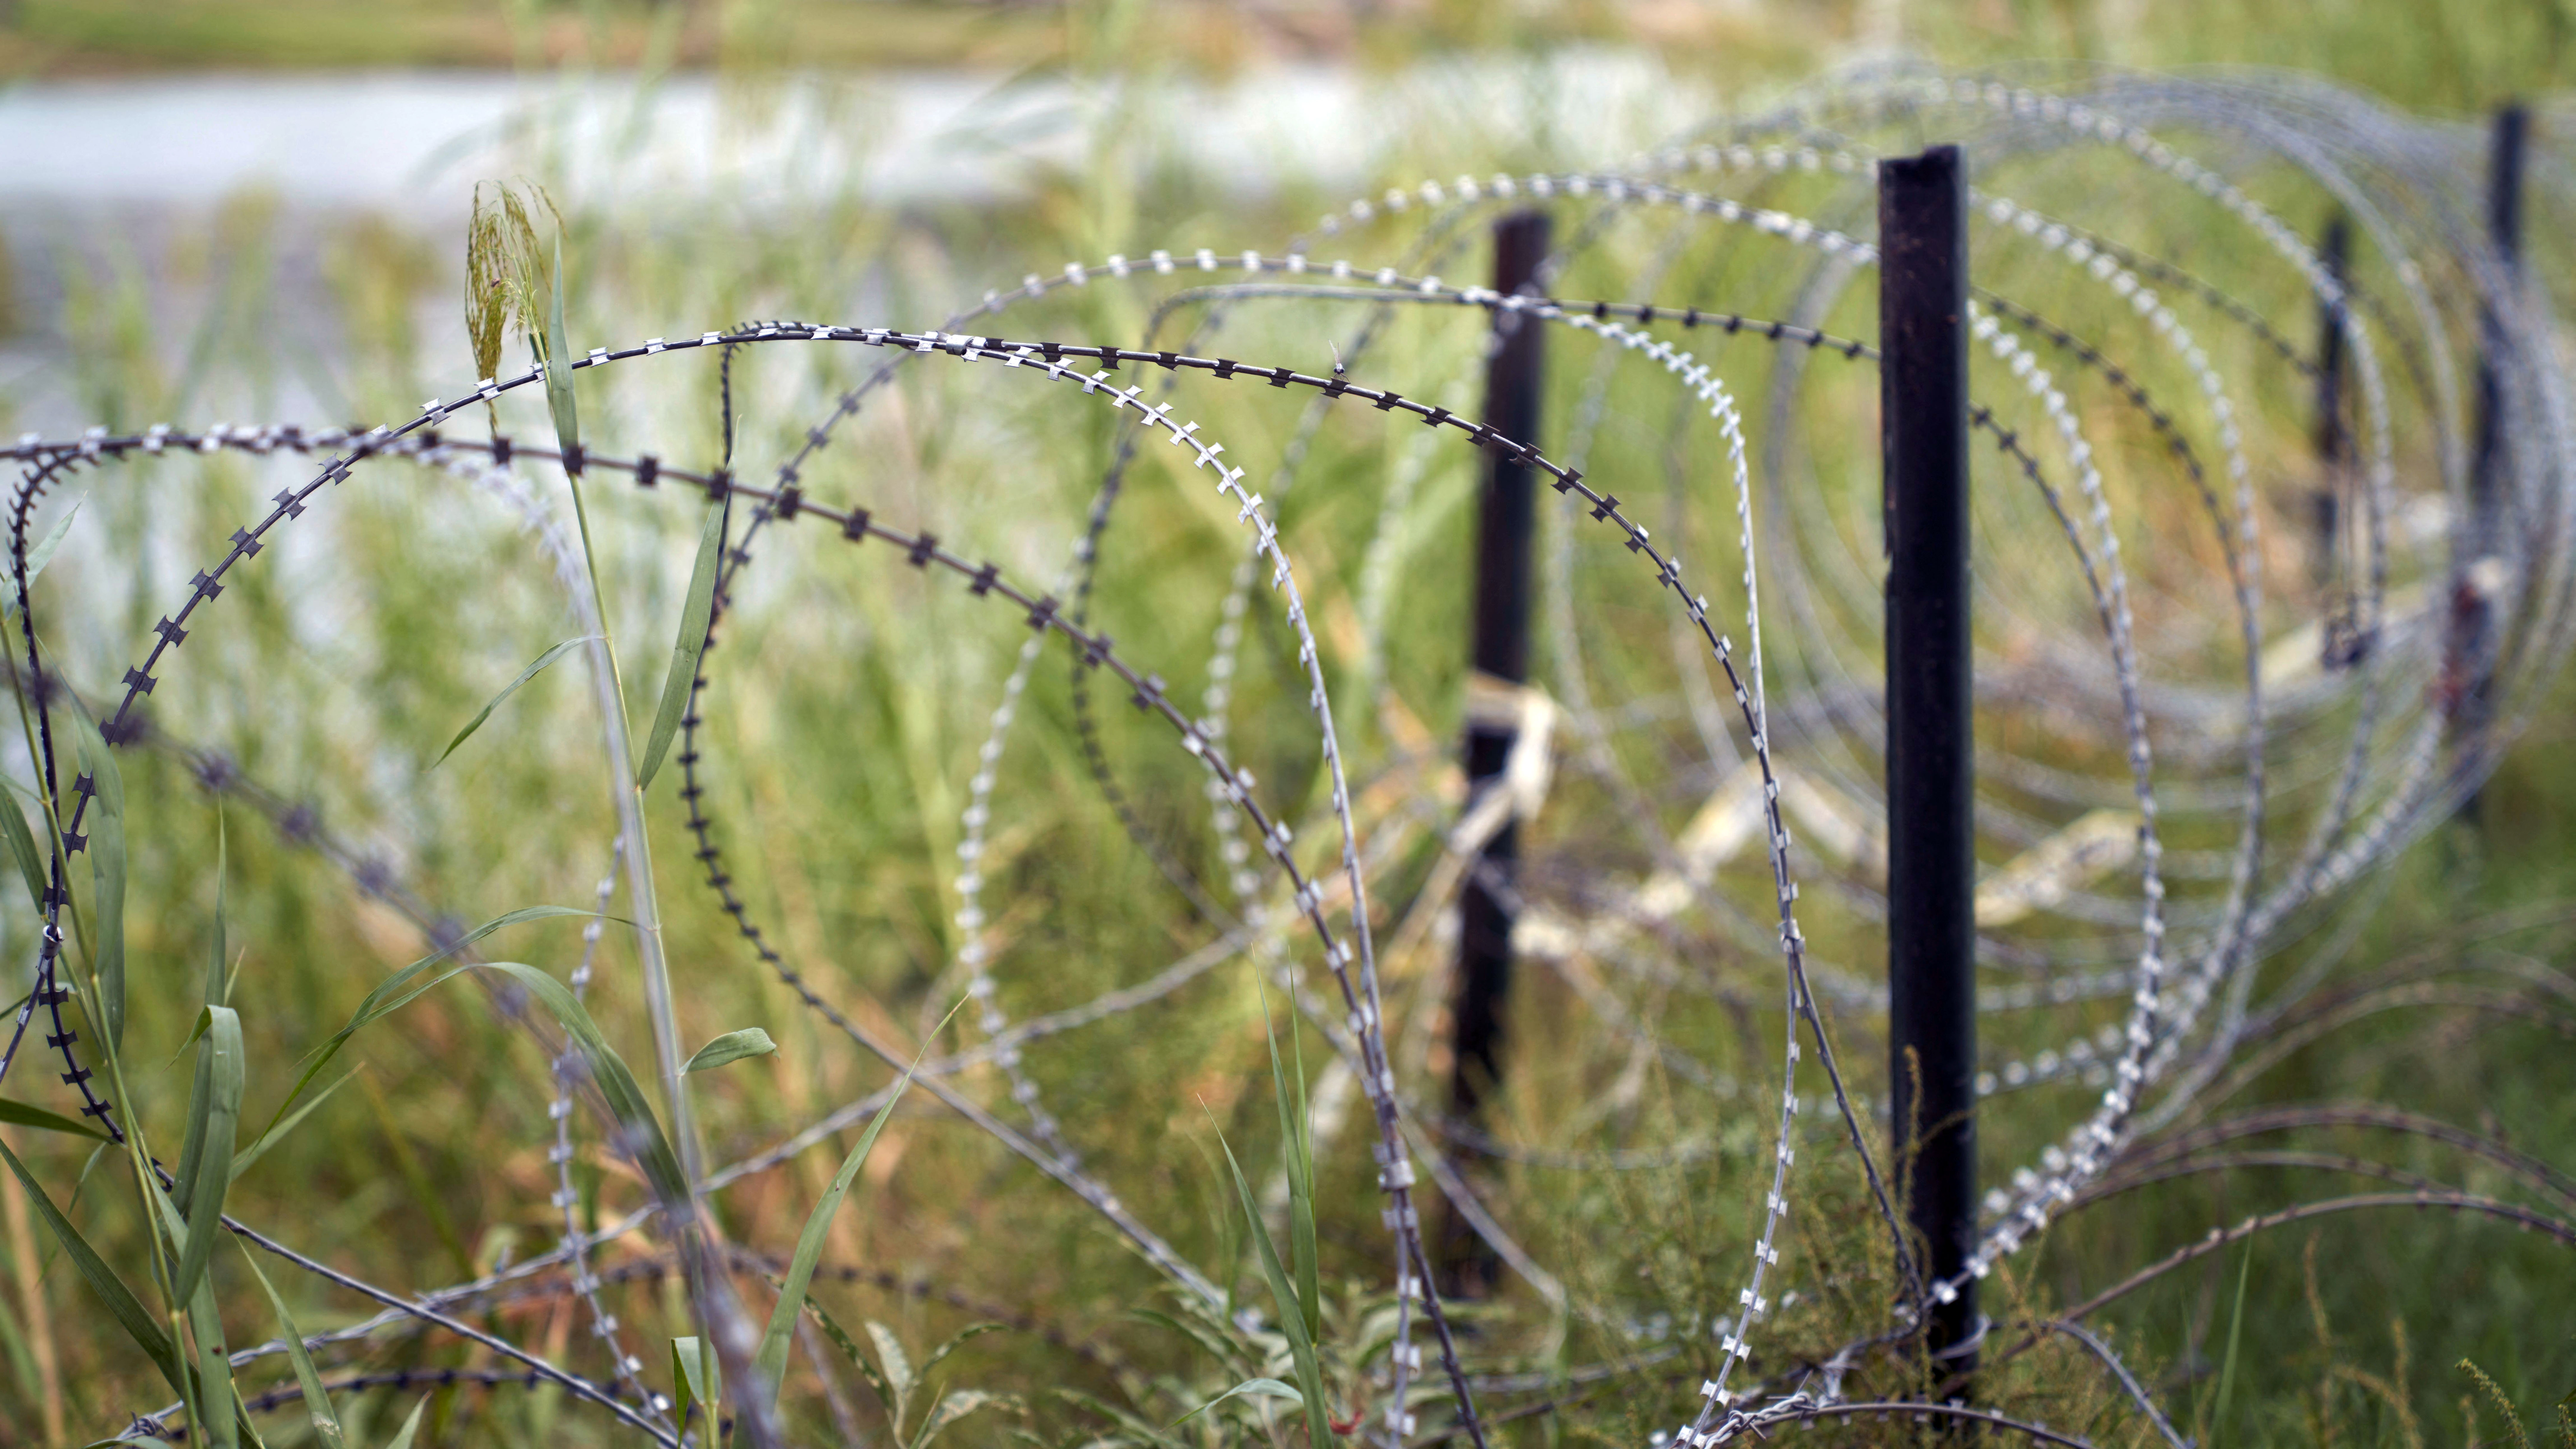 Razor wire separates the US southern border with Mexico on October 10, 2022 in Eagle Pass, Texas. - In the 2022 fiscal year US Customs and Border Patrol (CBP) has had over 2 million encounters with migrants at the US-Mexico border, setting a new record in CBP history.